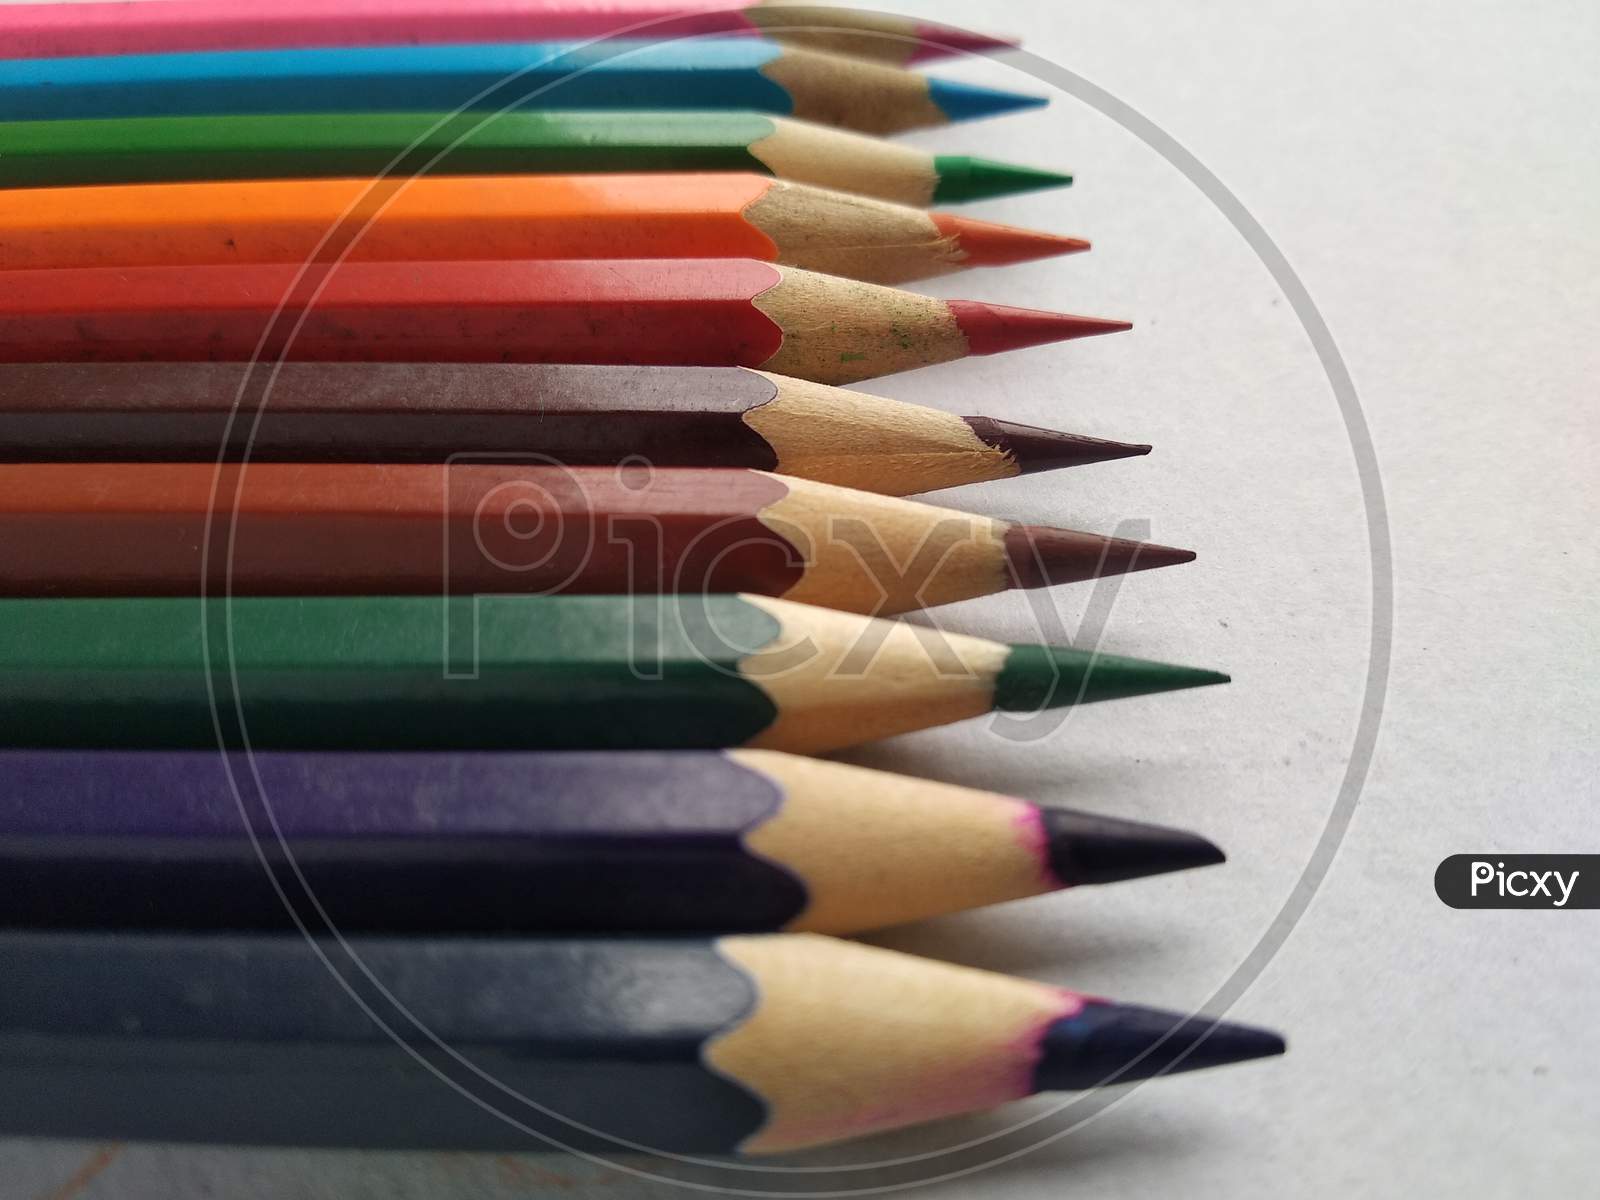 Discipline of colour pencils from dark shades to light shades